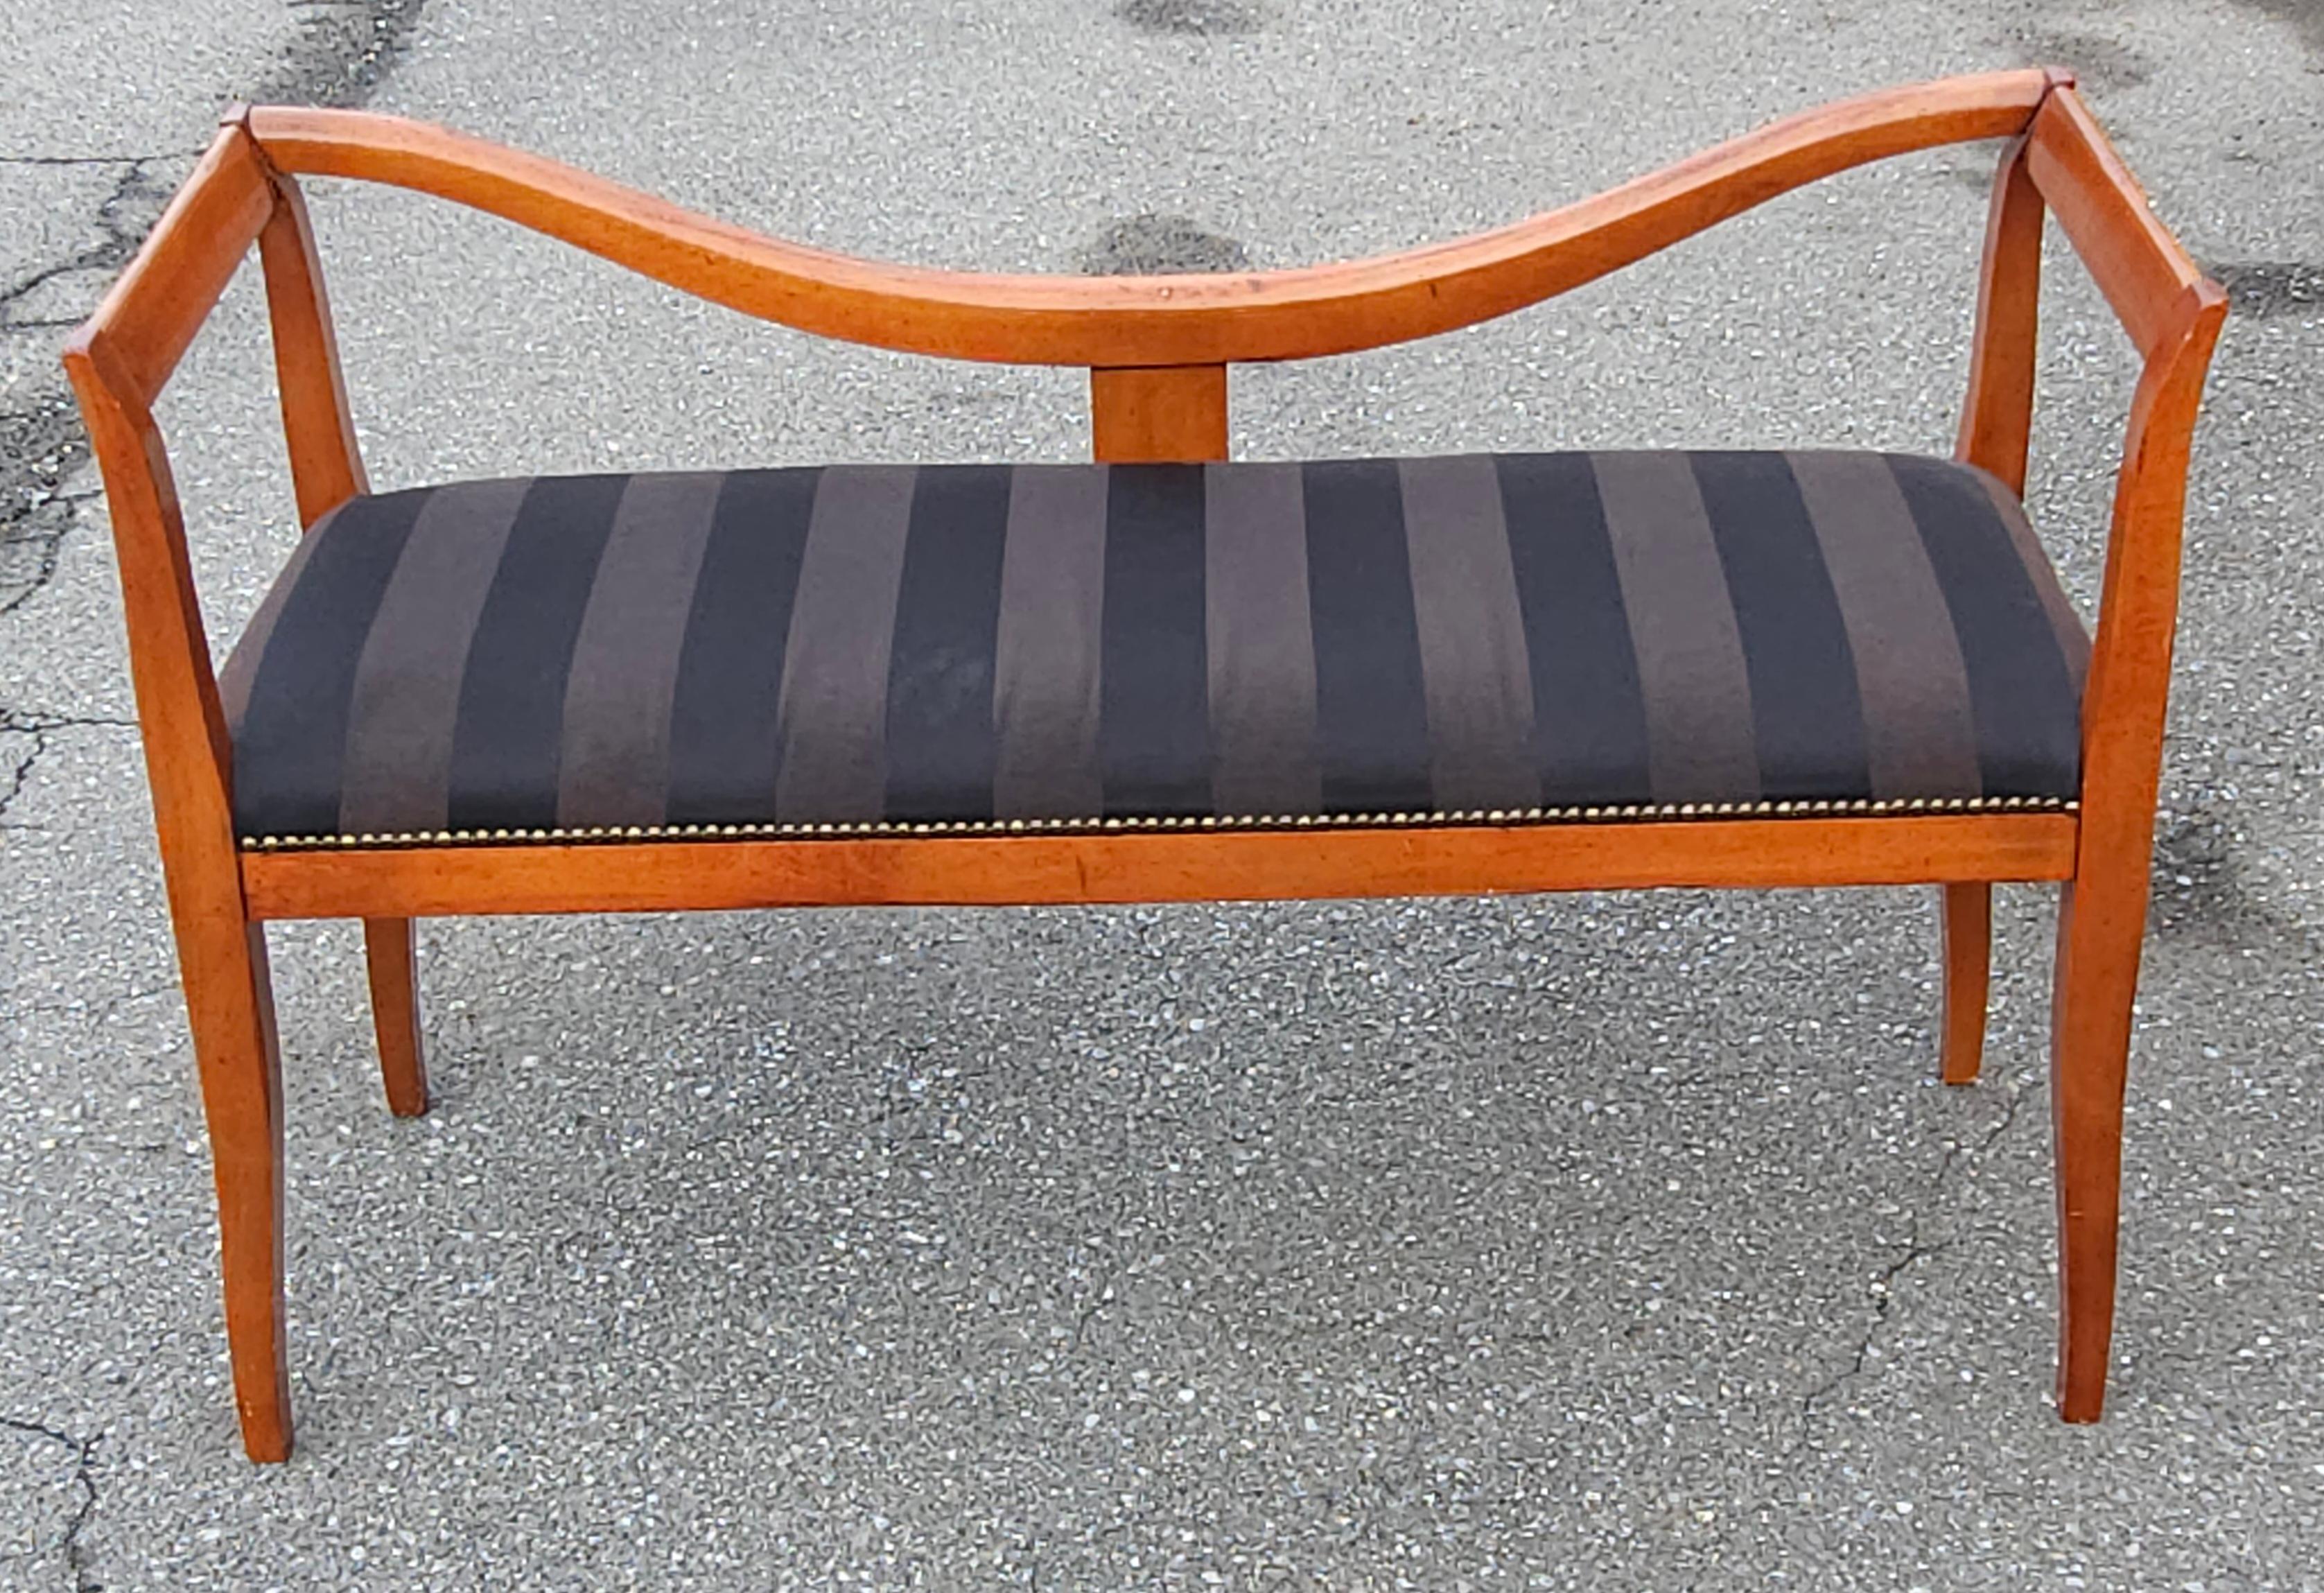 Late 20th C. Italian Lacquered Solid Cherry and Upholstered Bench Settee In Good Condition For Sale In Germantown, MD